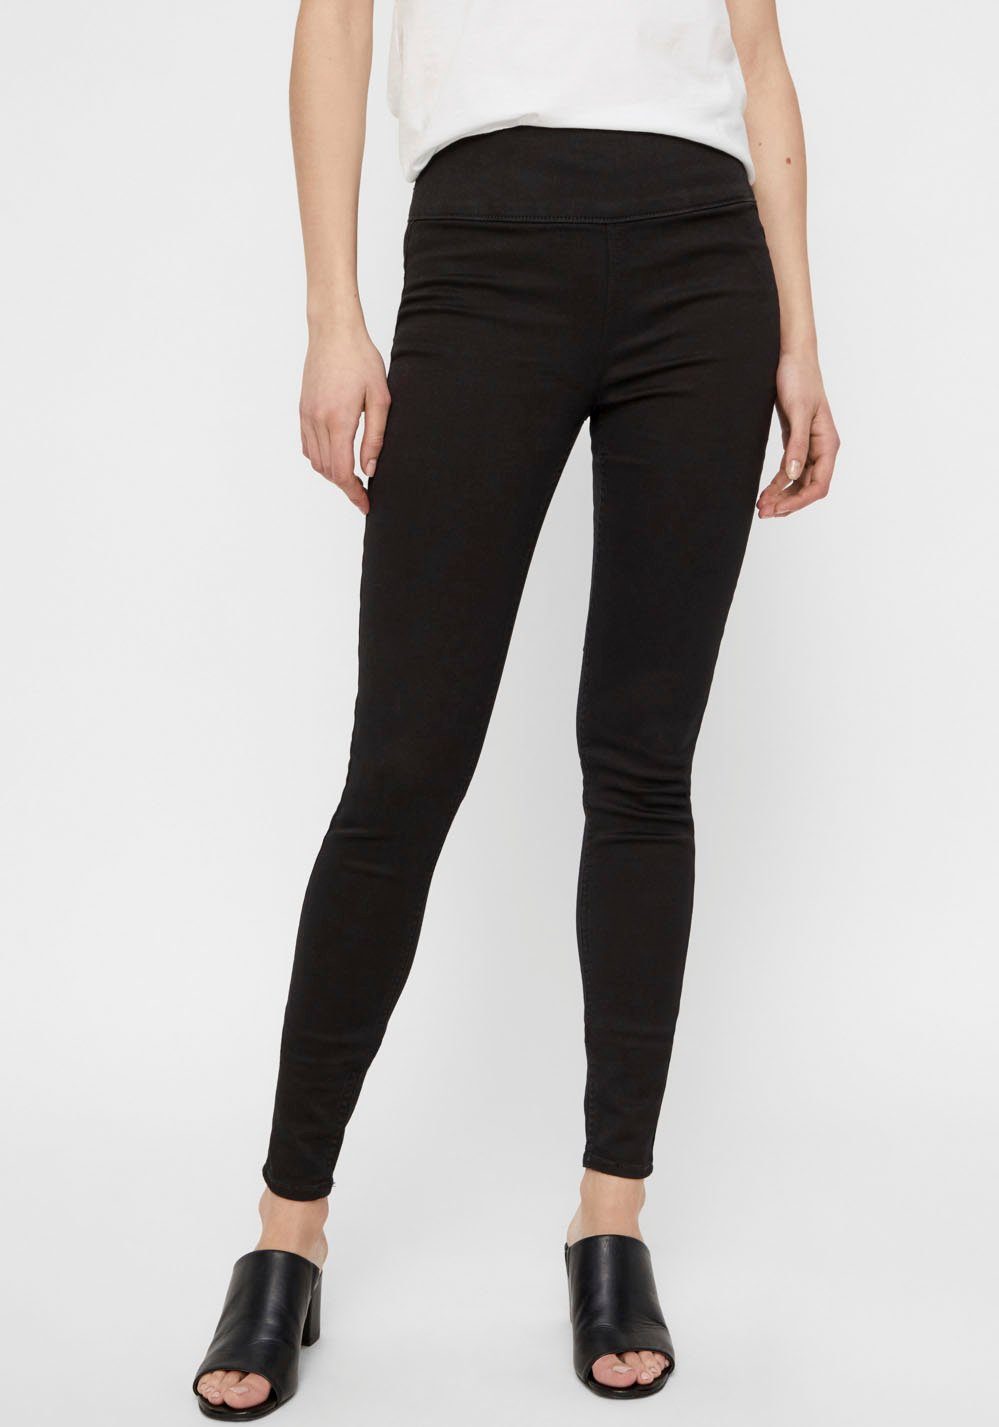 pieces Jeansjeggings »PCHIGHWAIST SOFT JEGGINGS« | OTTO